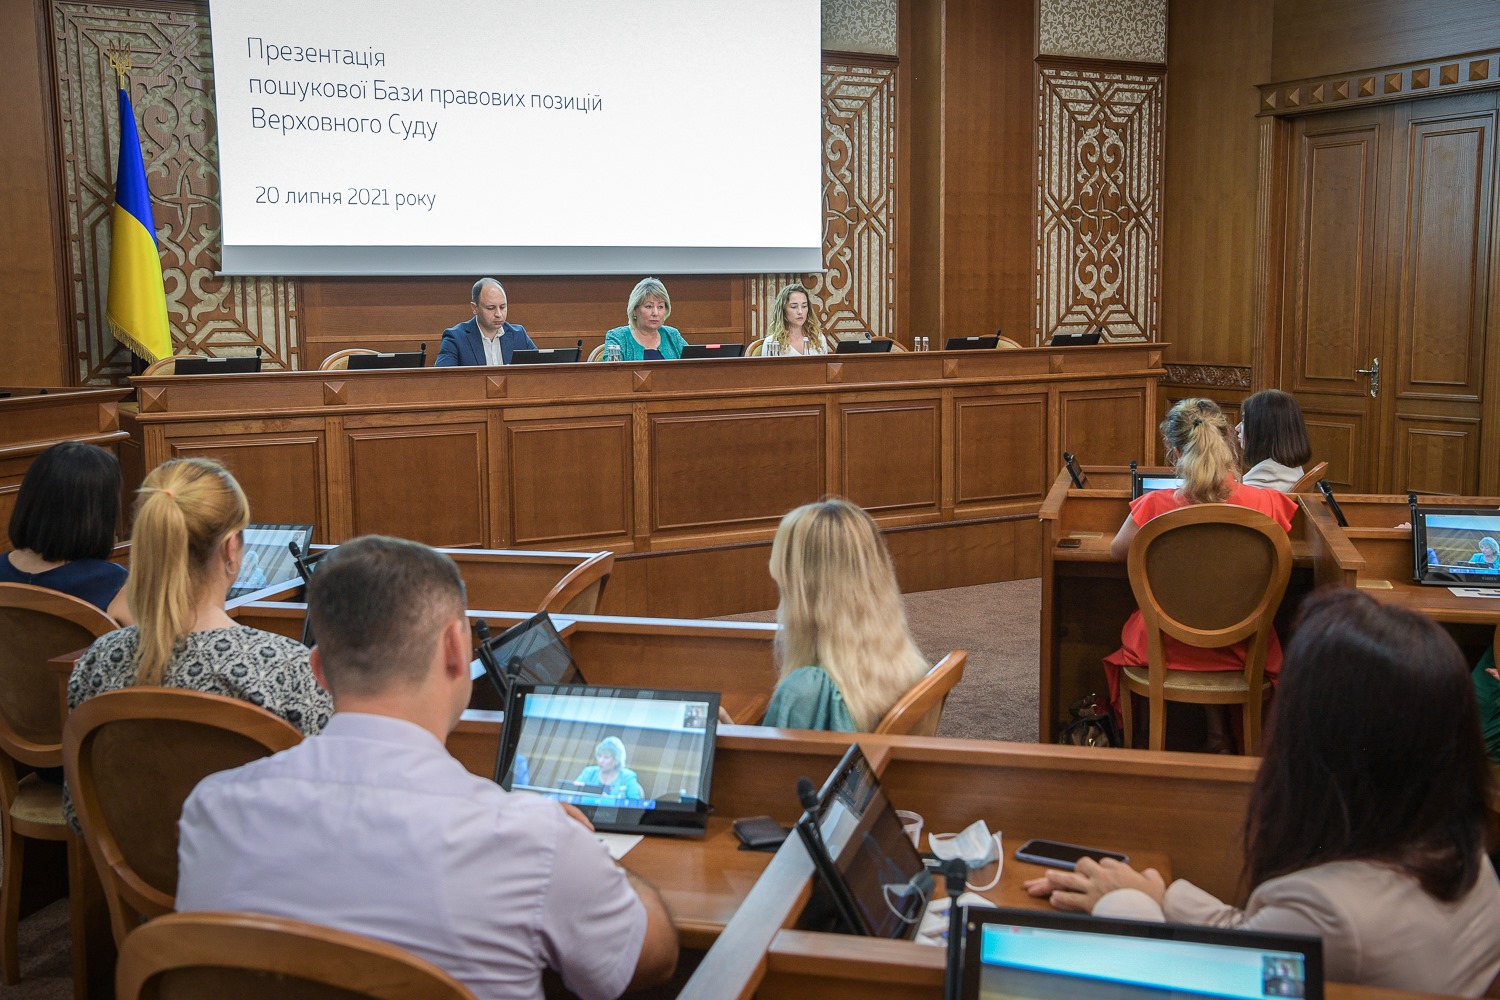 Database of Legal Positions of the Supreme Court presented and launched